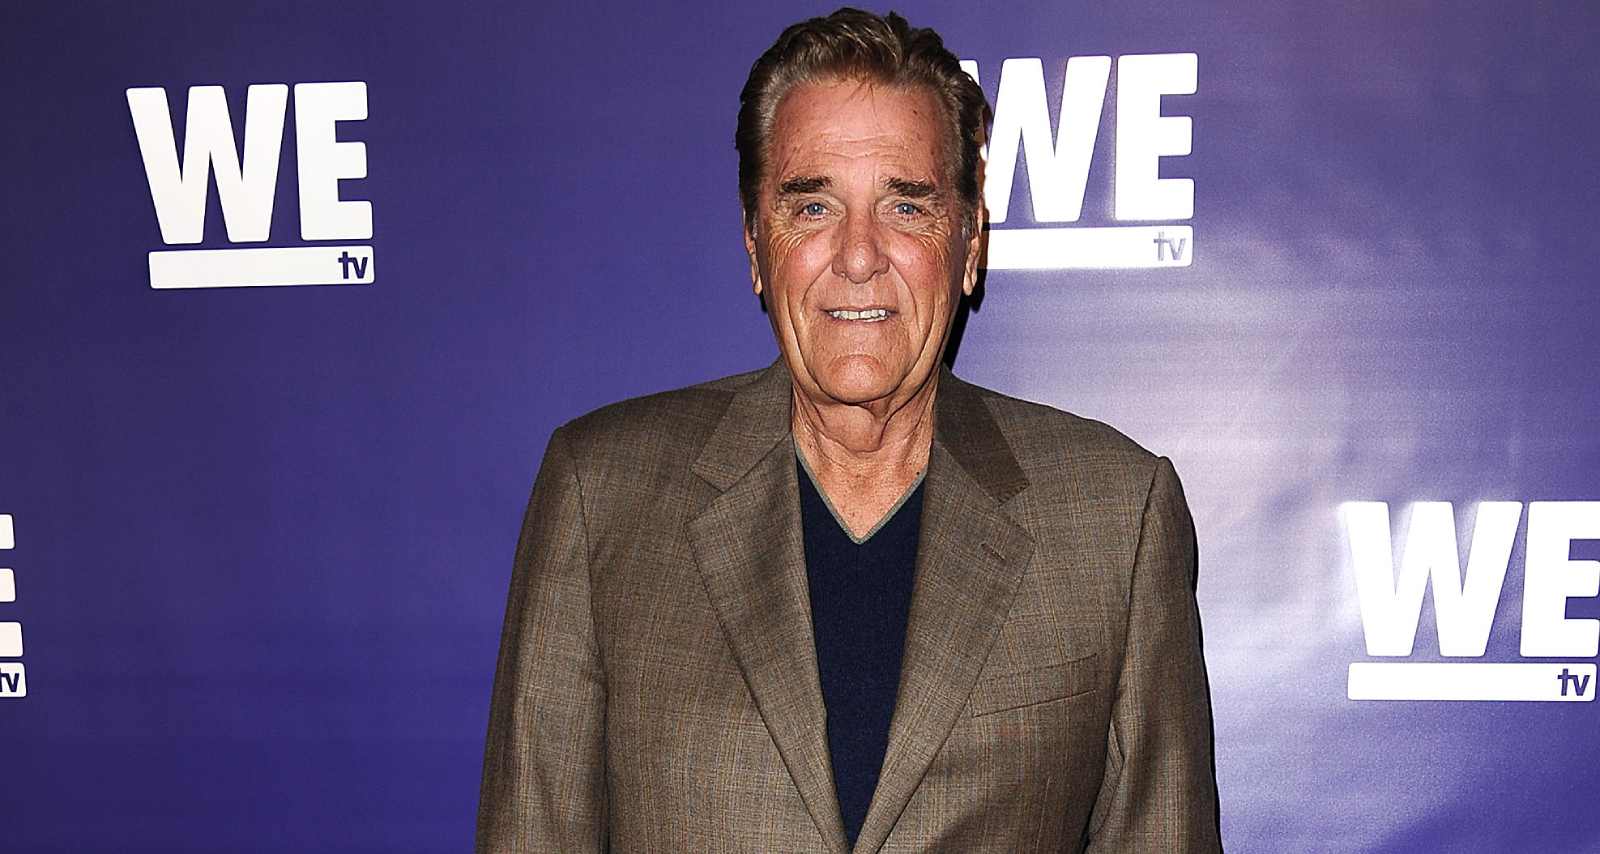 Chuck Woolery Reveals Son Tested Positive for COVID-19: Backtracks on Previous Claims